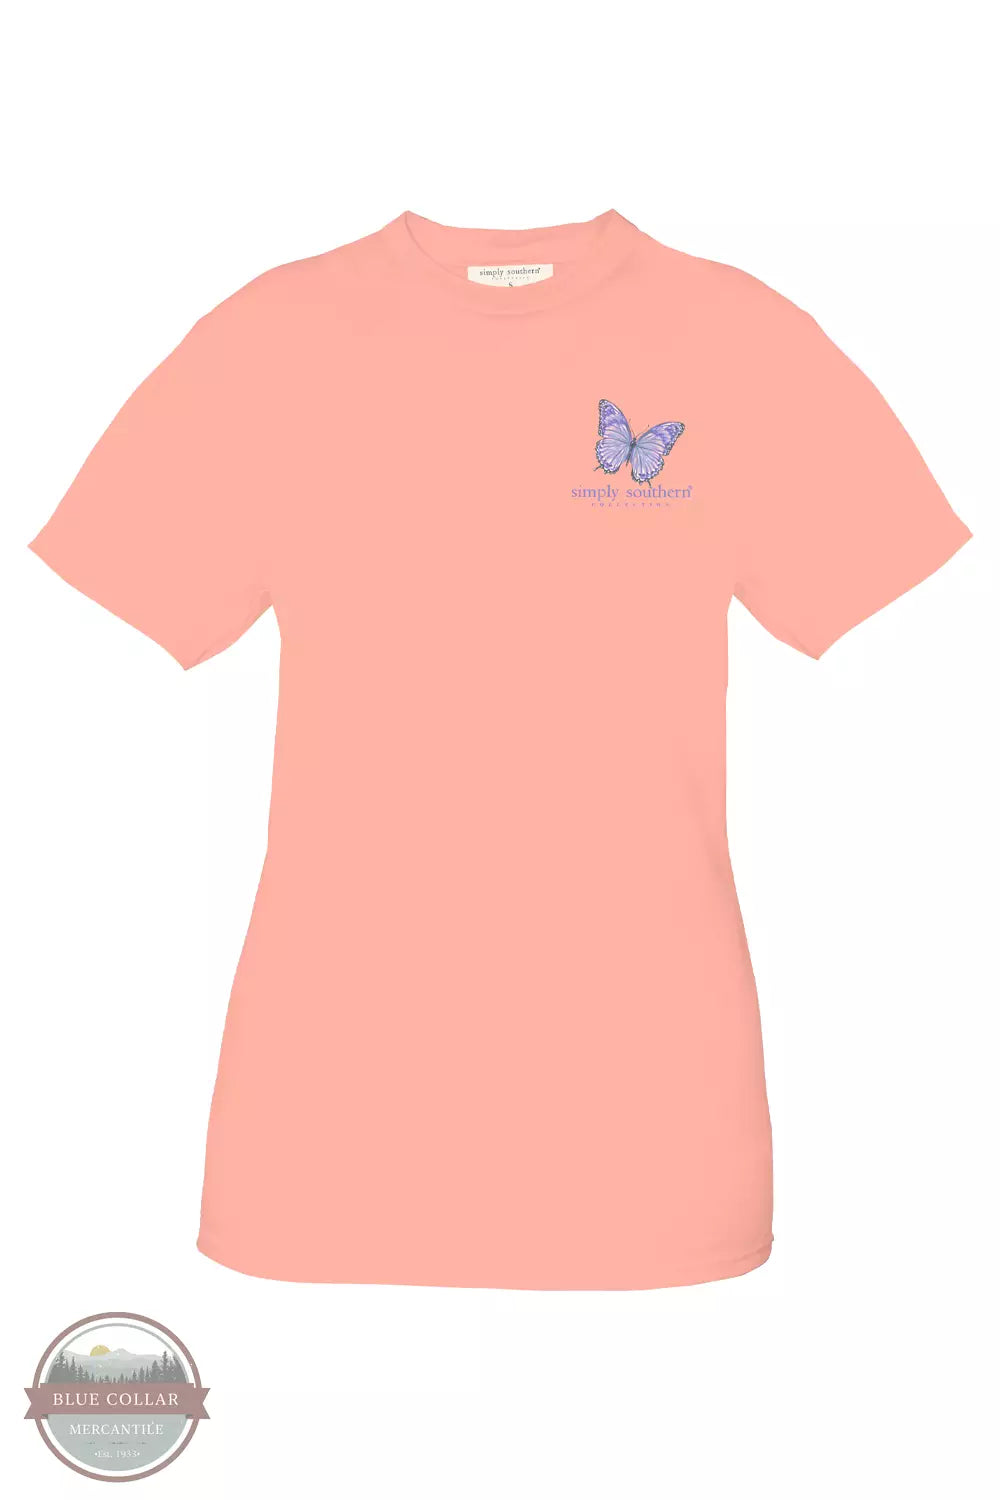 Simply Southern SS-WING-COCKTAIL Under His Wings T-Shirt in Cocktail Peach Front View